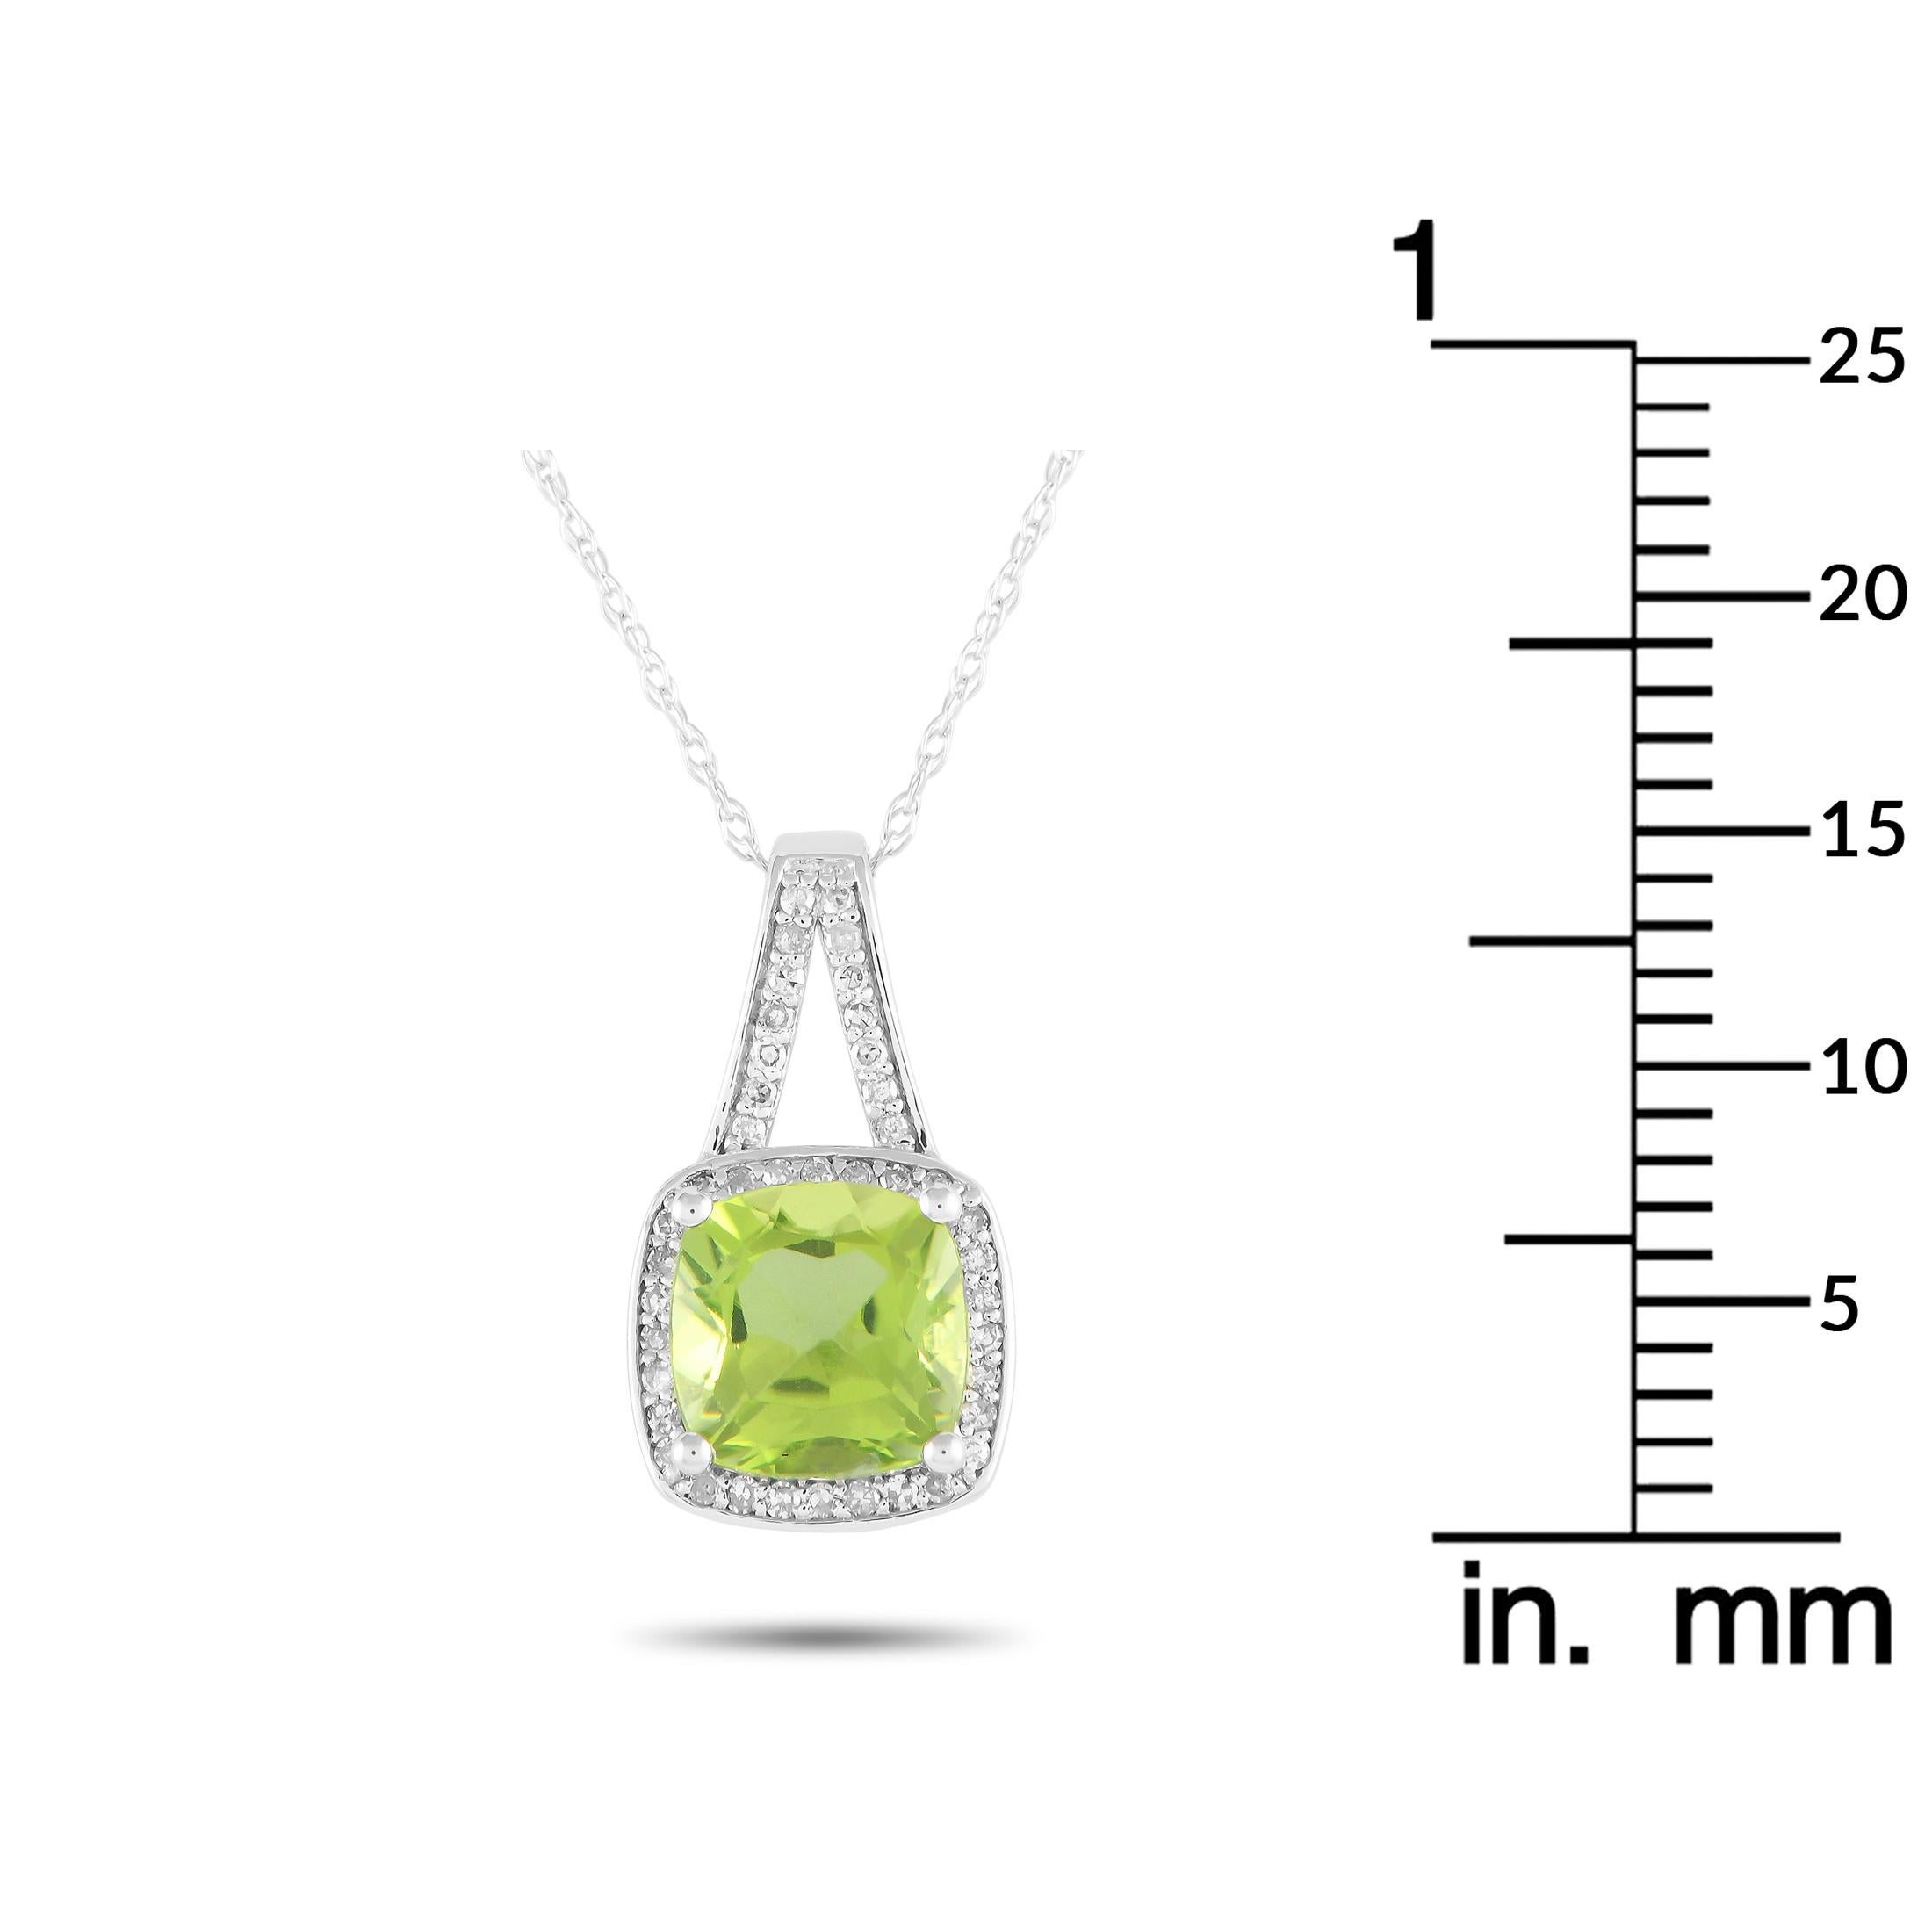 LB Exclusive 14K White Gold 0.12ct Diamond and Peridot Necklace PD4-16273WPE In New Condition For Sale In Southampton, PA